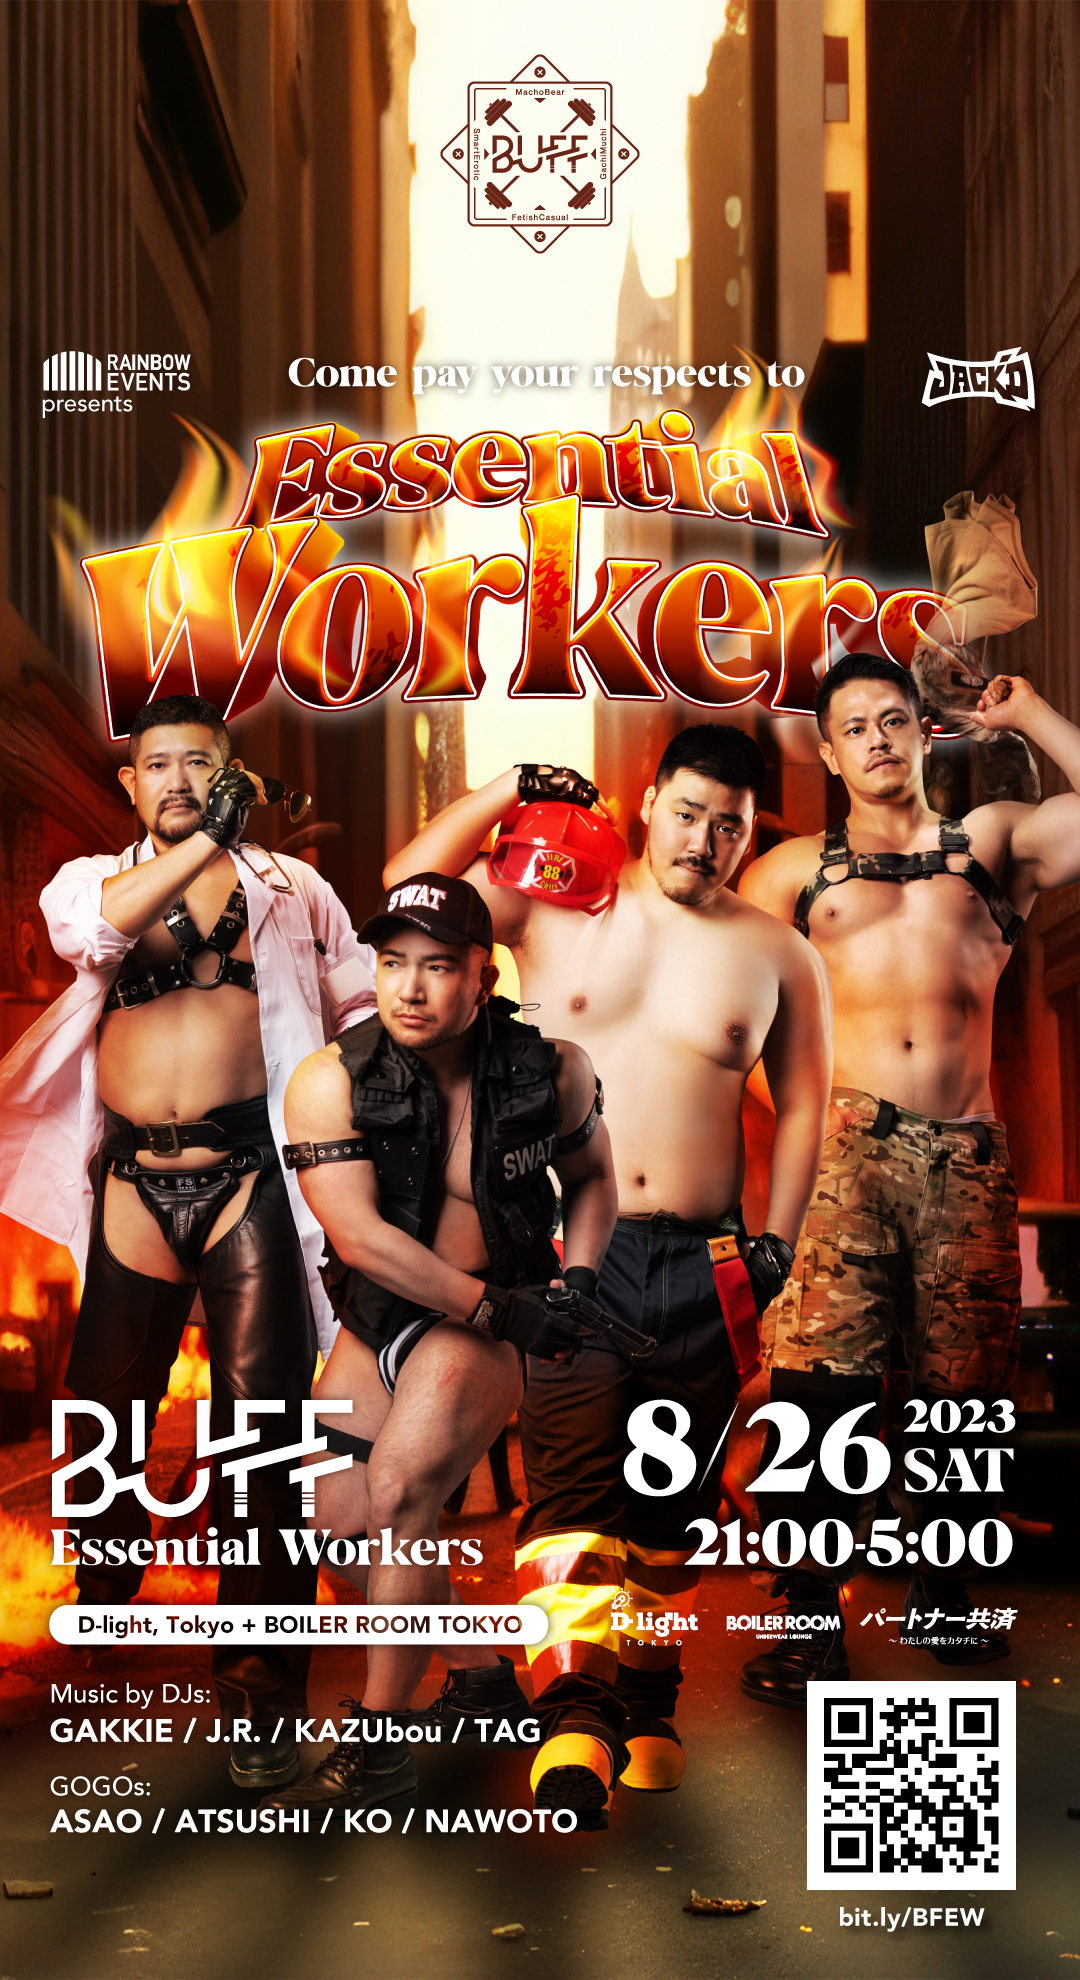 BUFF Essential Workers